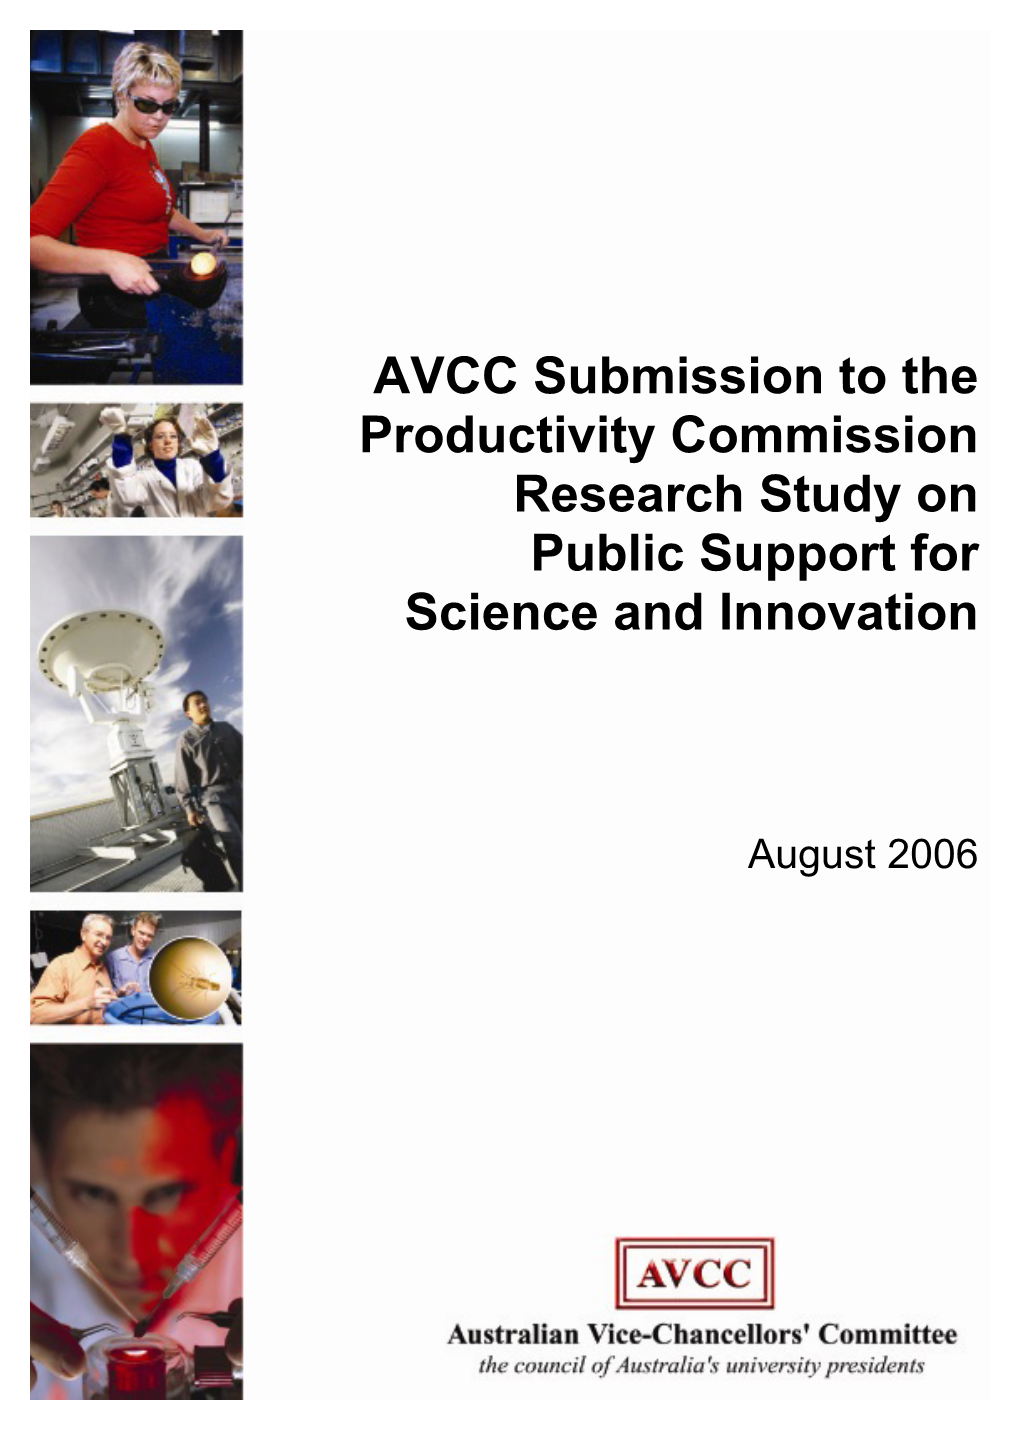 AVCC Submission to the Productivity Commission Research Study on Public Support for Science and Innovation